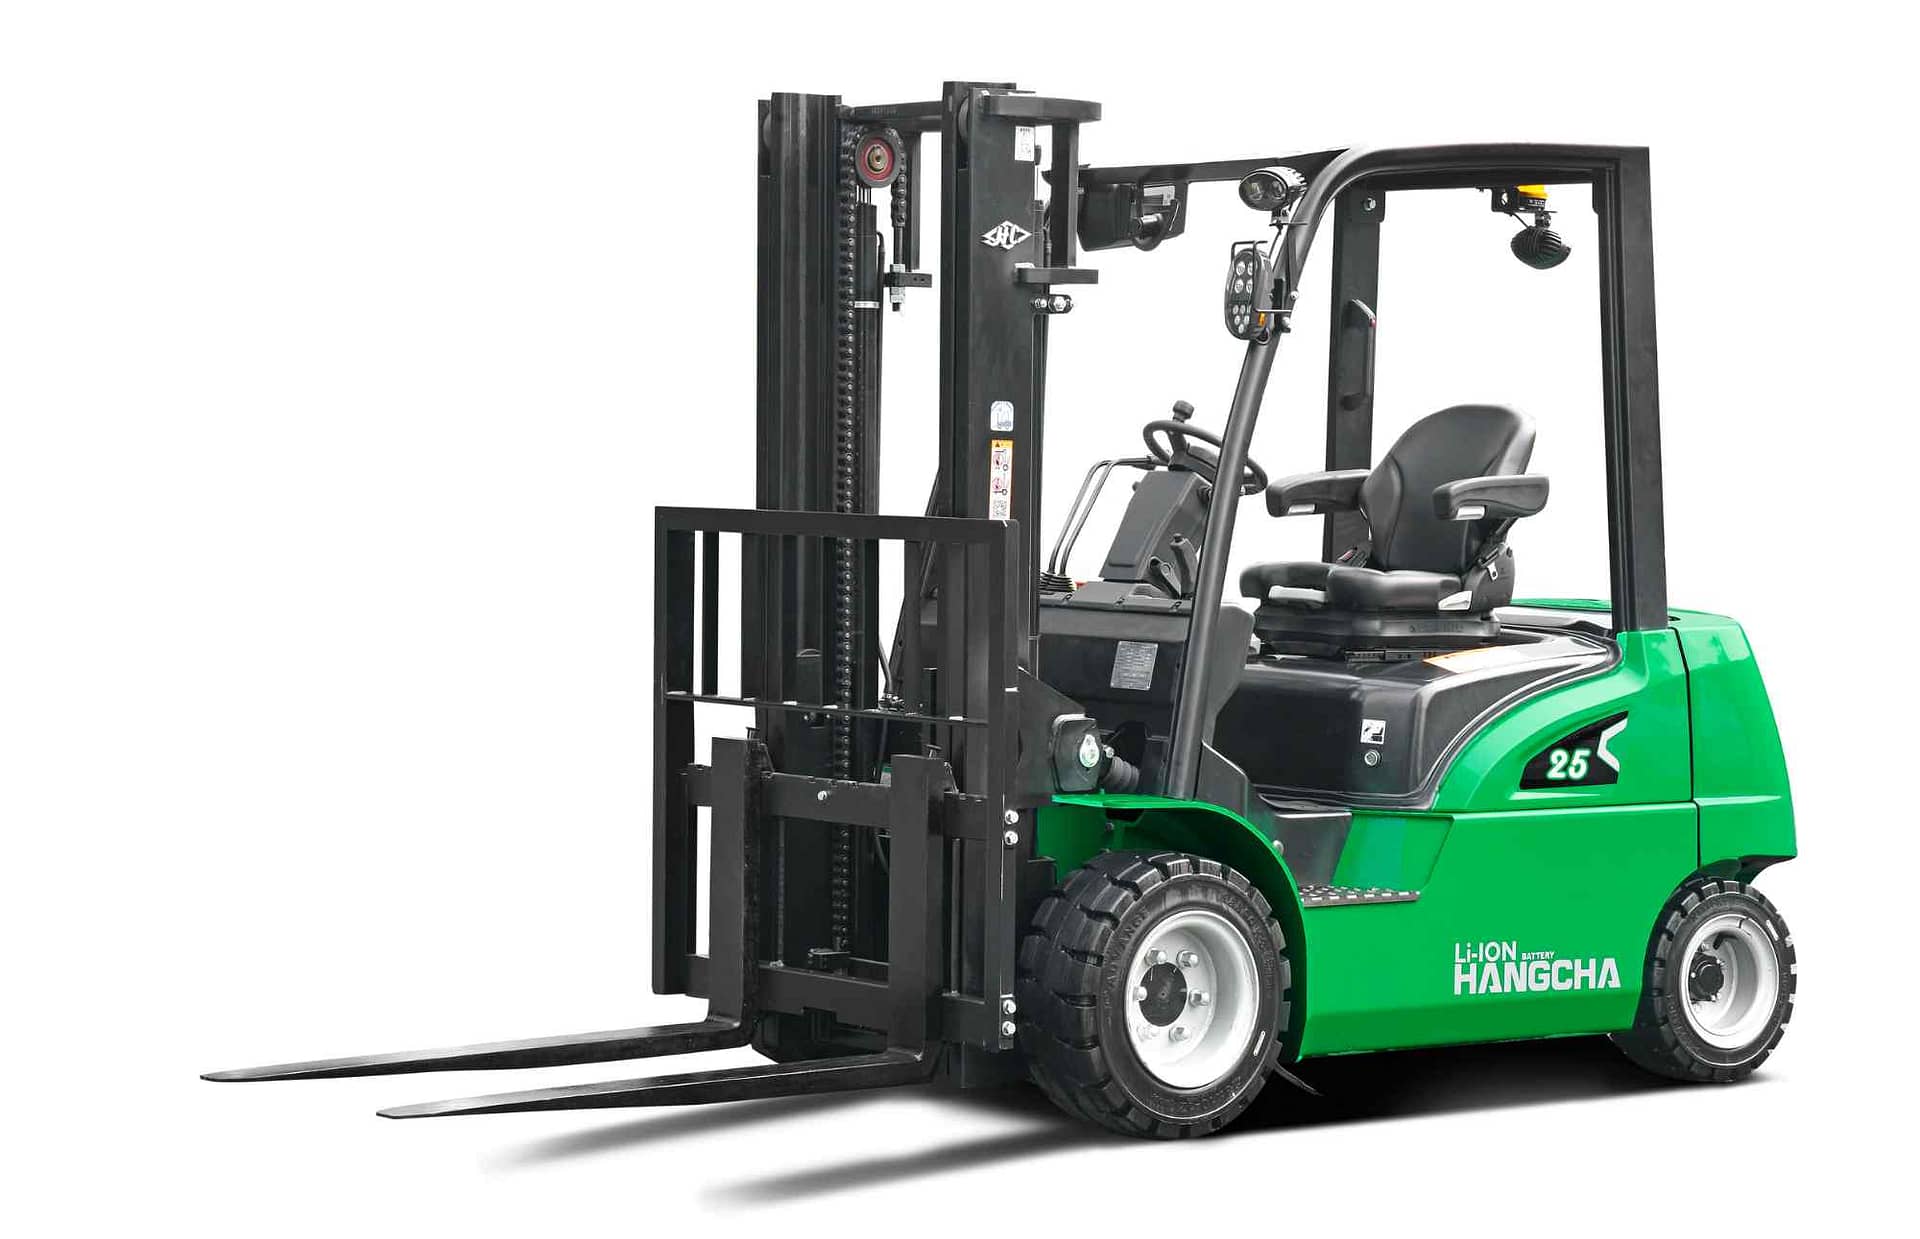 2.5t Lithium Electric Forklift